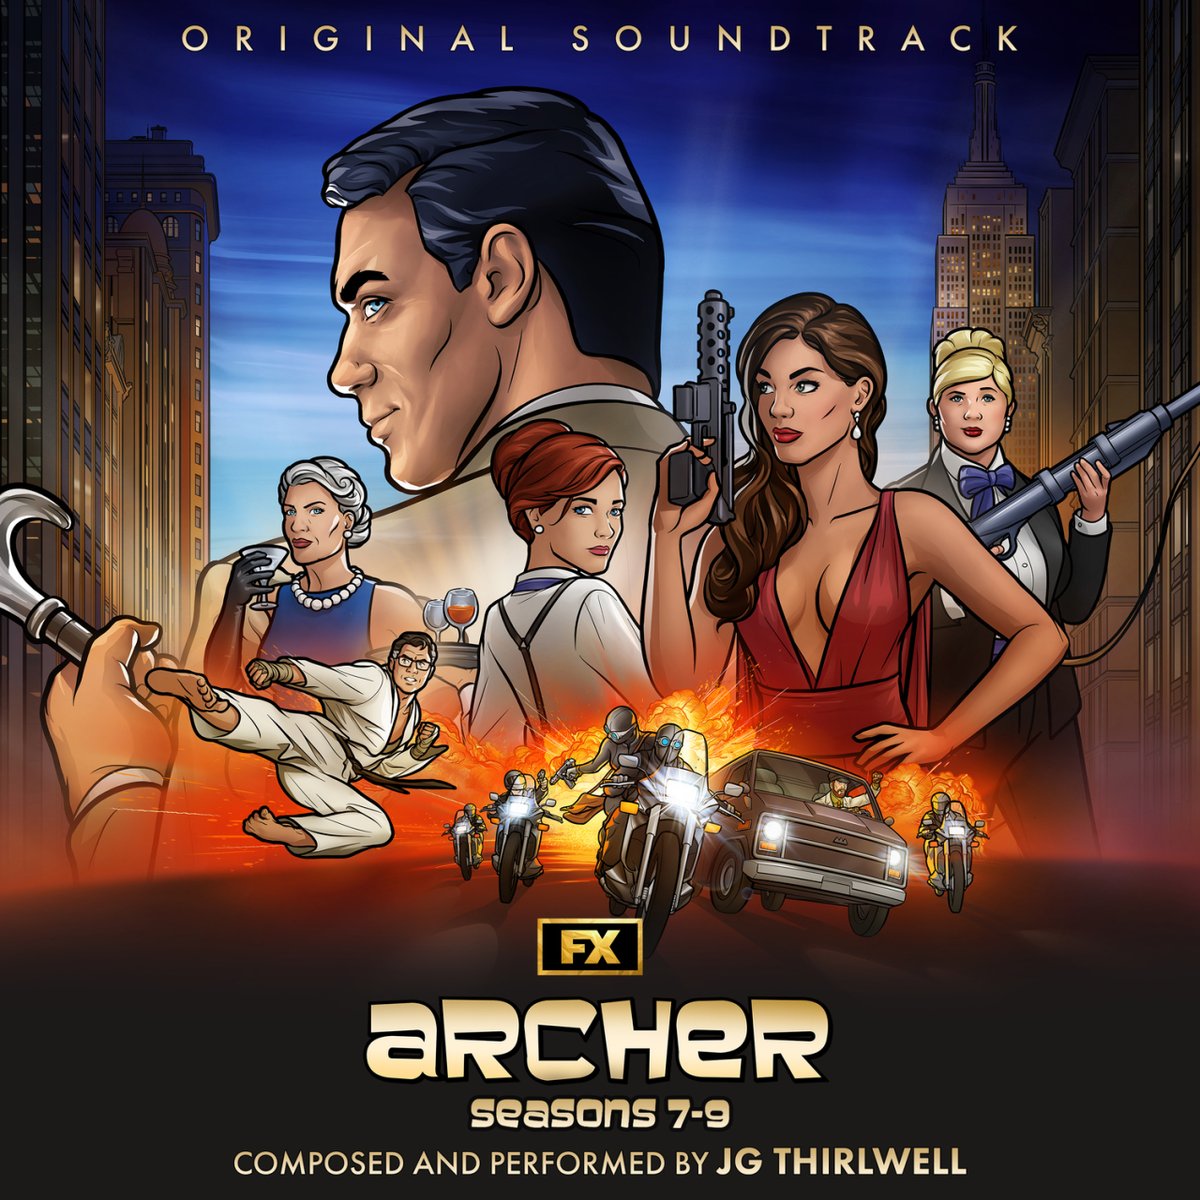 The Archer Original Soundtrack Album by JG Thirlwell is hitting streaming services today May 3 2024, courtesy of the Disney Music Group. 30 tracks of pulsing action, intrigue, seduction, thrills and insanity. Go listen. @archerfxx